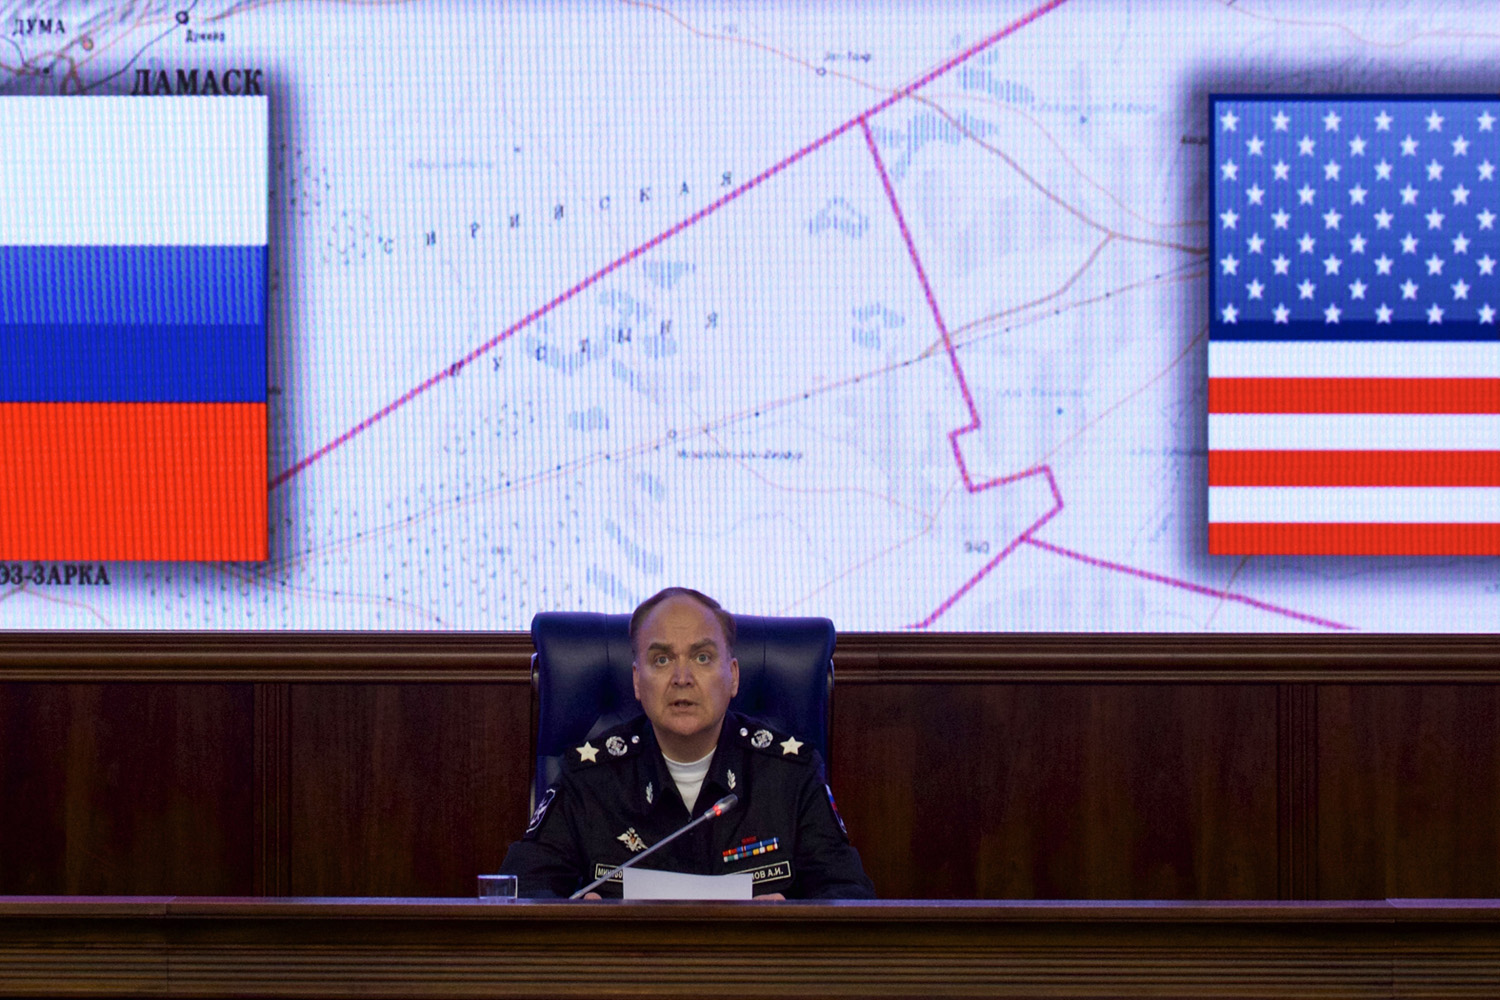 Russian Deputy Defense Minister Anatoly Antonov speaks at a briefing in the Defense Ministry in Moscow, Russia. (Ivan Sekretarev/AP)